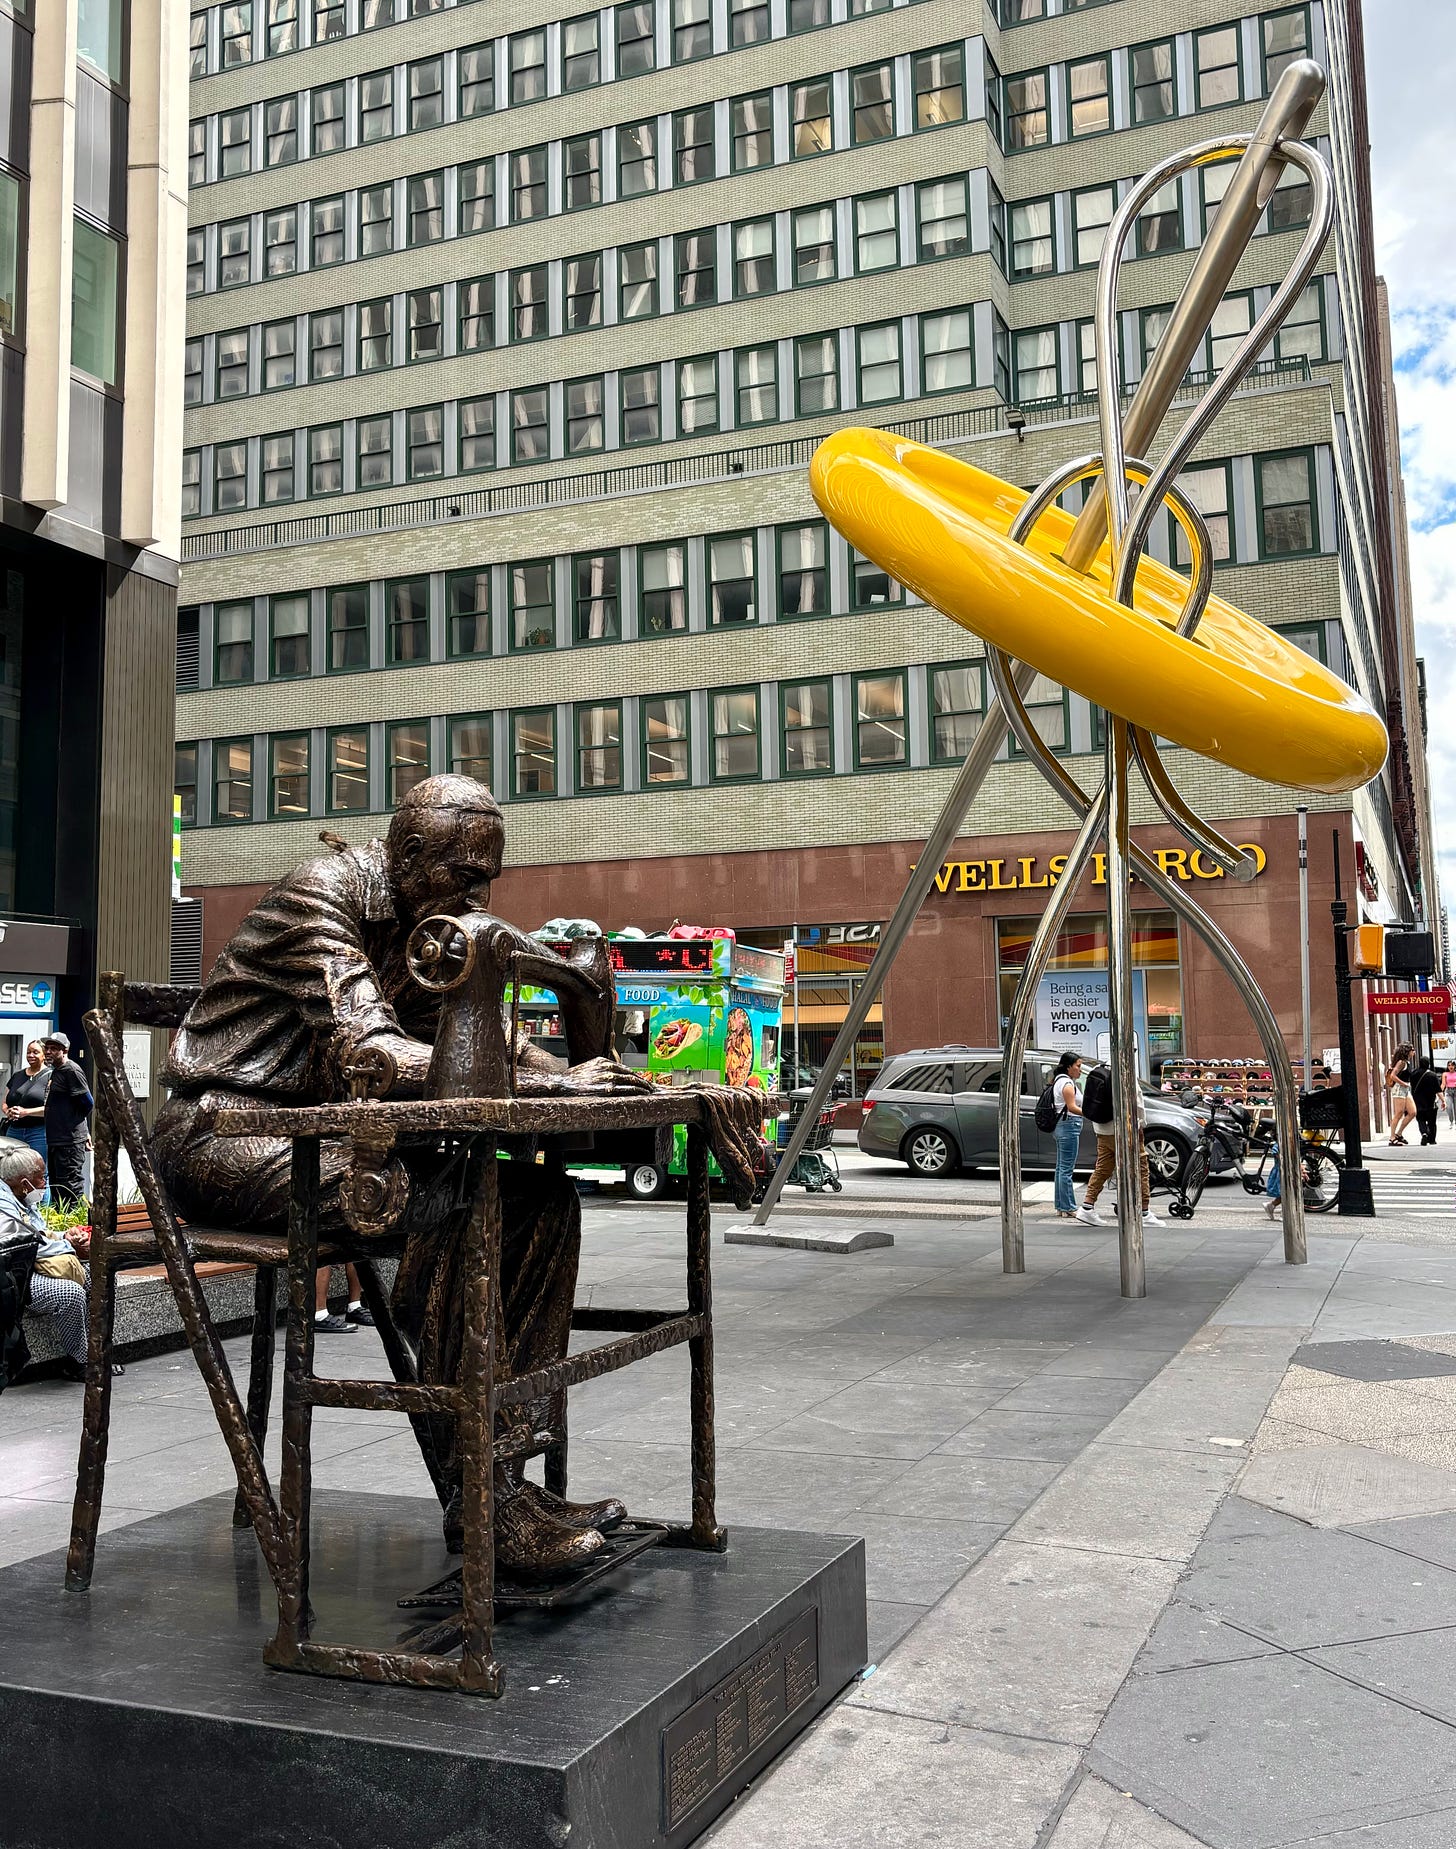 A bronze statue of an older, tired-looking man in a yarmulke bent over a sewing machine. Behind him is a monumental-sized yellow button with a silver needle and thread in it.